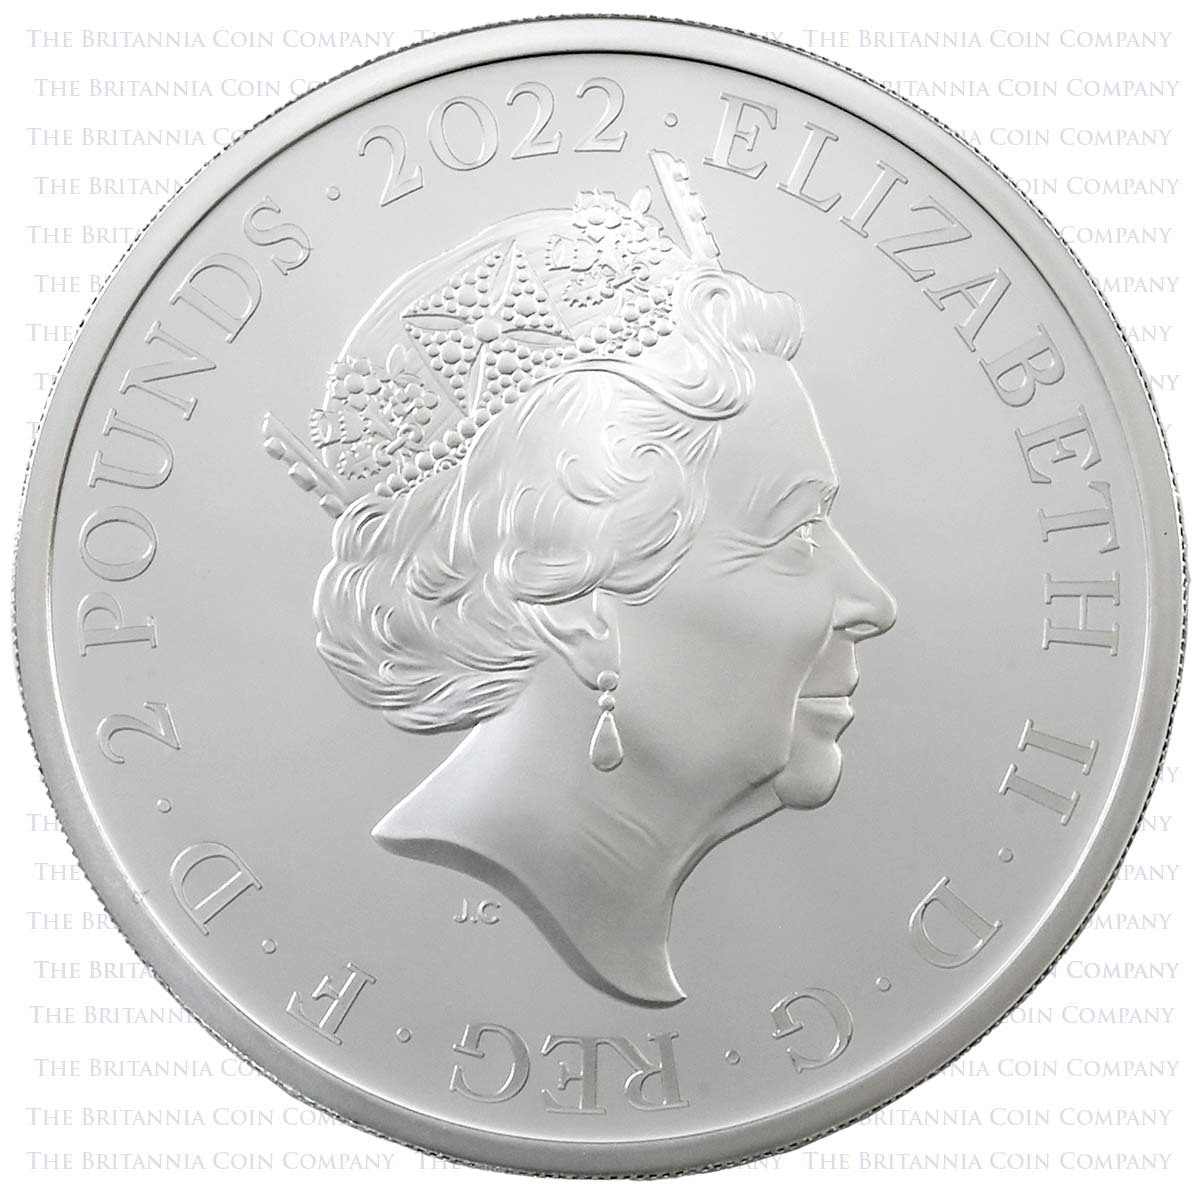 2022 British Monarchs James I 1 Ounce Silver Proof Obverse